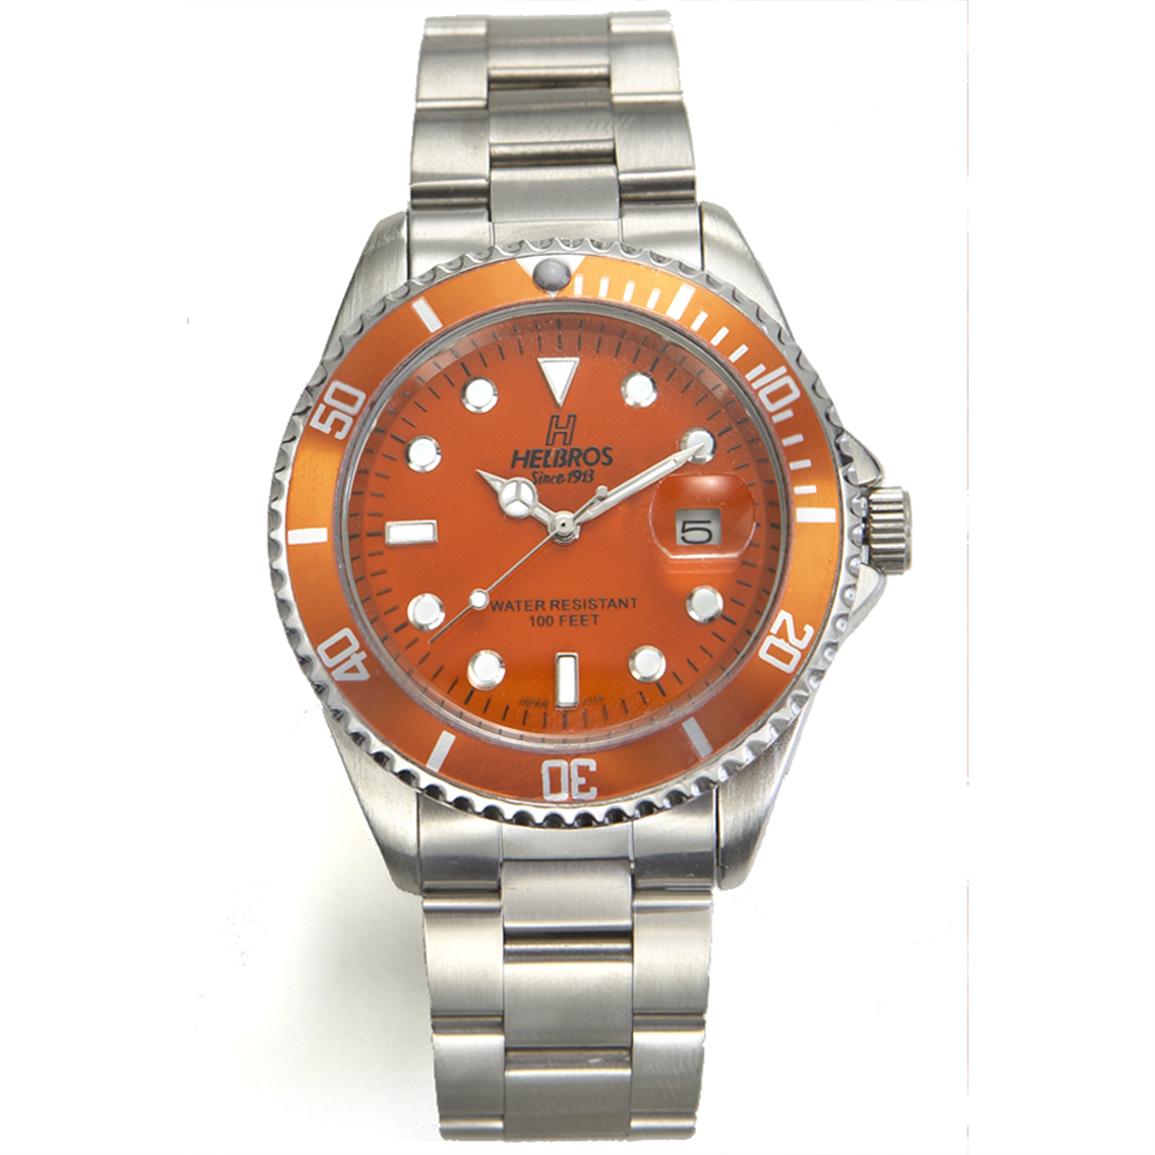 Helbros Dive - style Watch - 185238, Watches at Sportsman's Guide